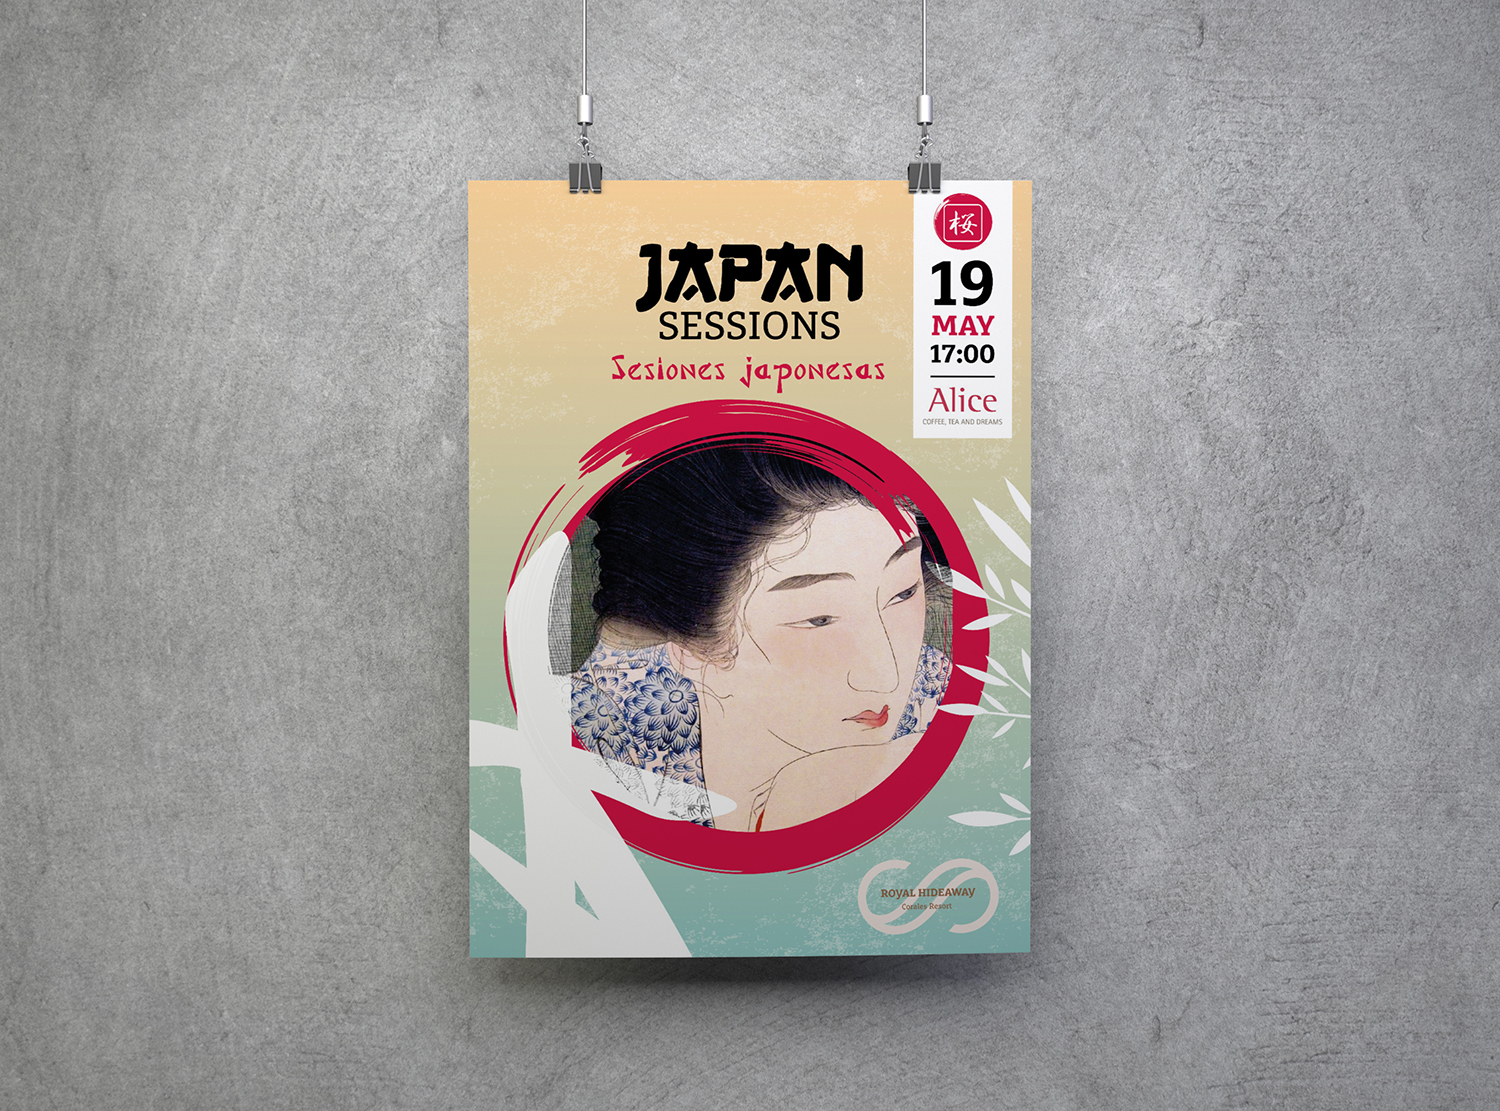 JAPAN SESSIONS POSTER